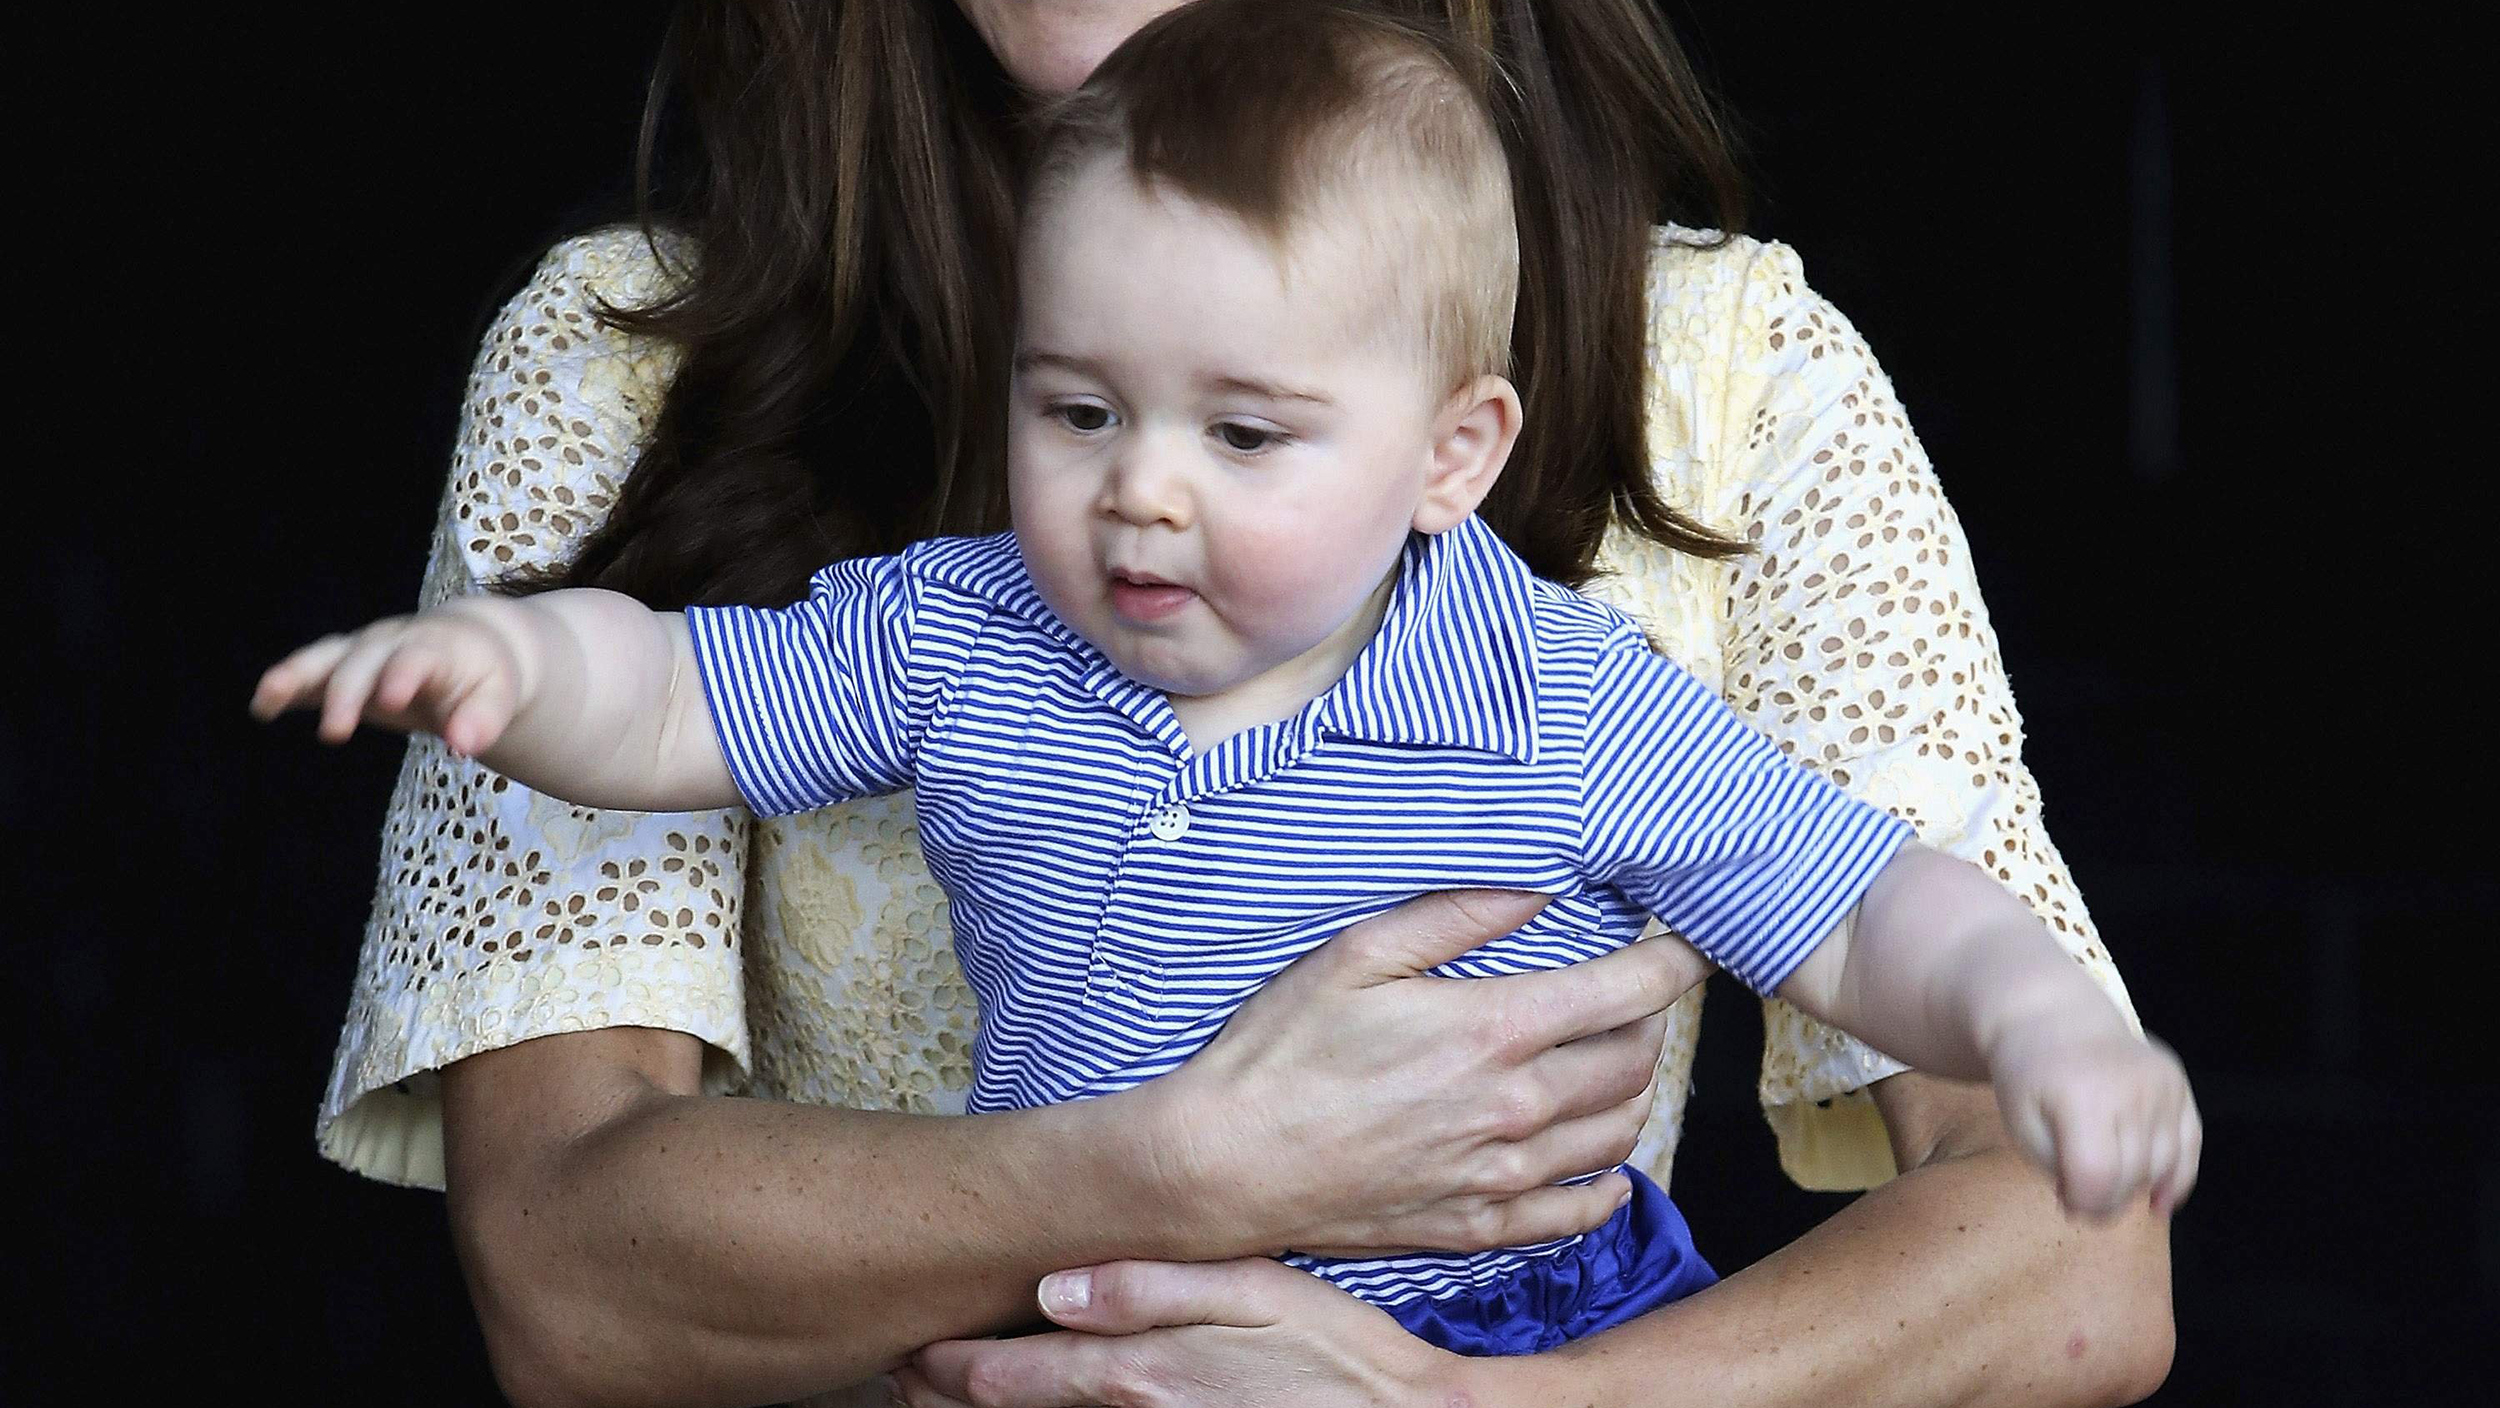 Baby Development Prince George: A Peek into the Life of the Third in Line to the British Throne